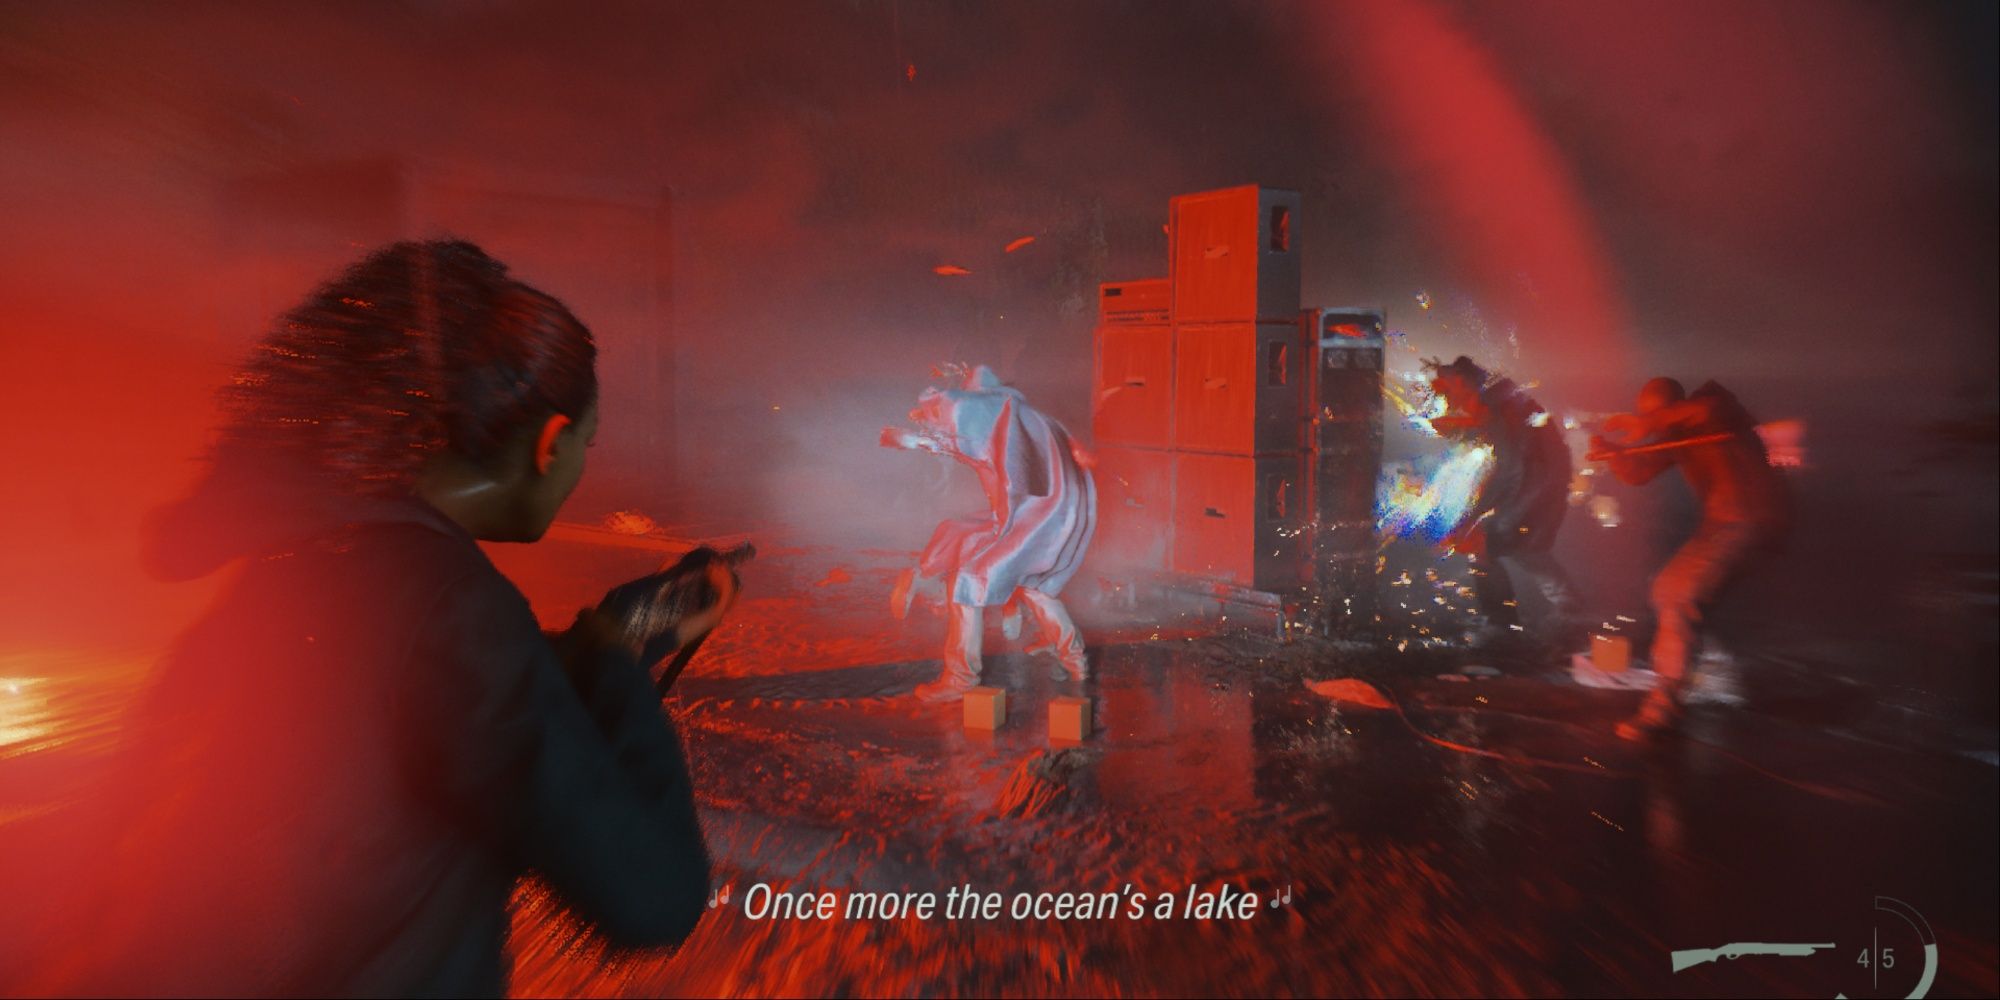 Saga pointing her shotgun at three enemies who are thrown back by a red flare of light as a song plays.